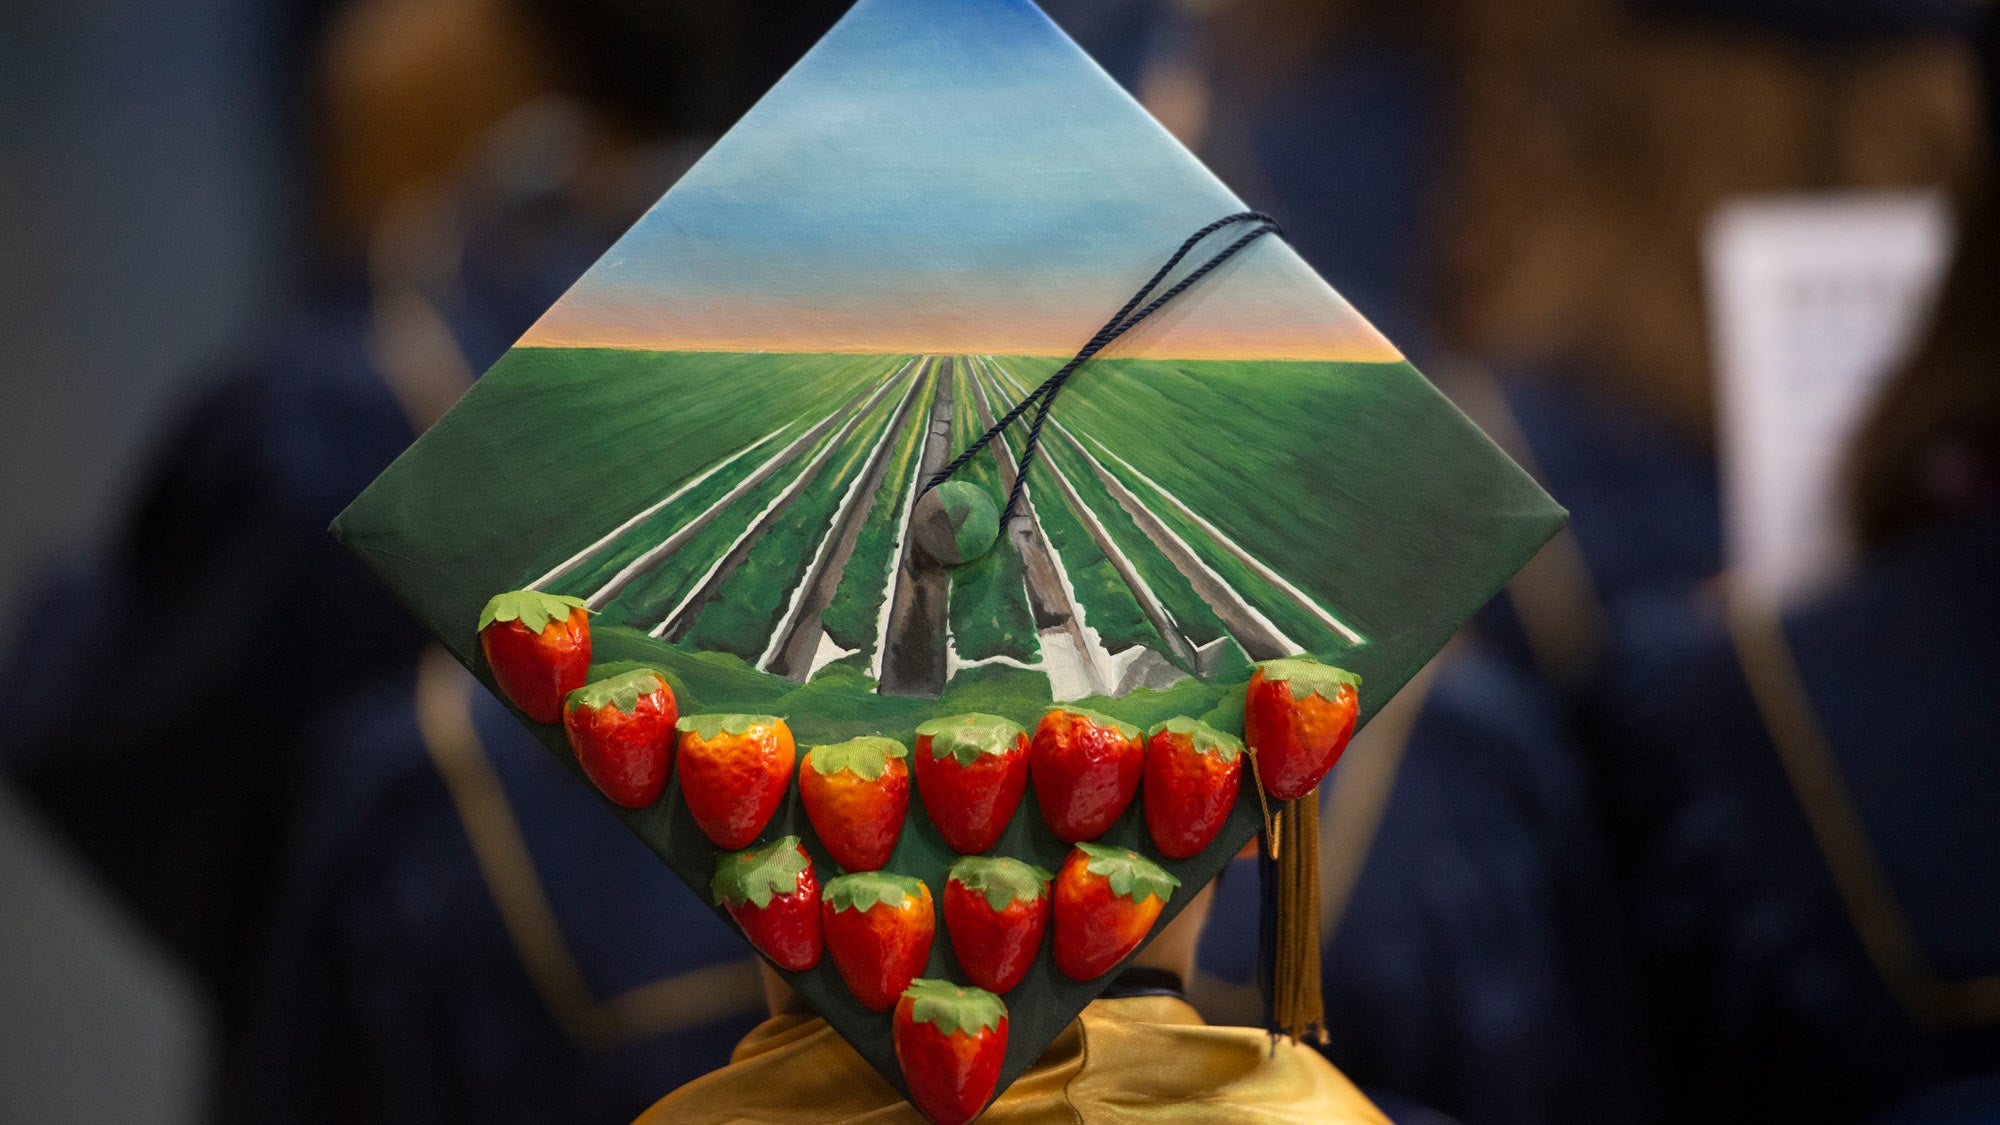 Strawberry field (and strawberries) on grad cap